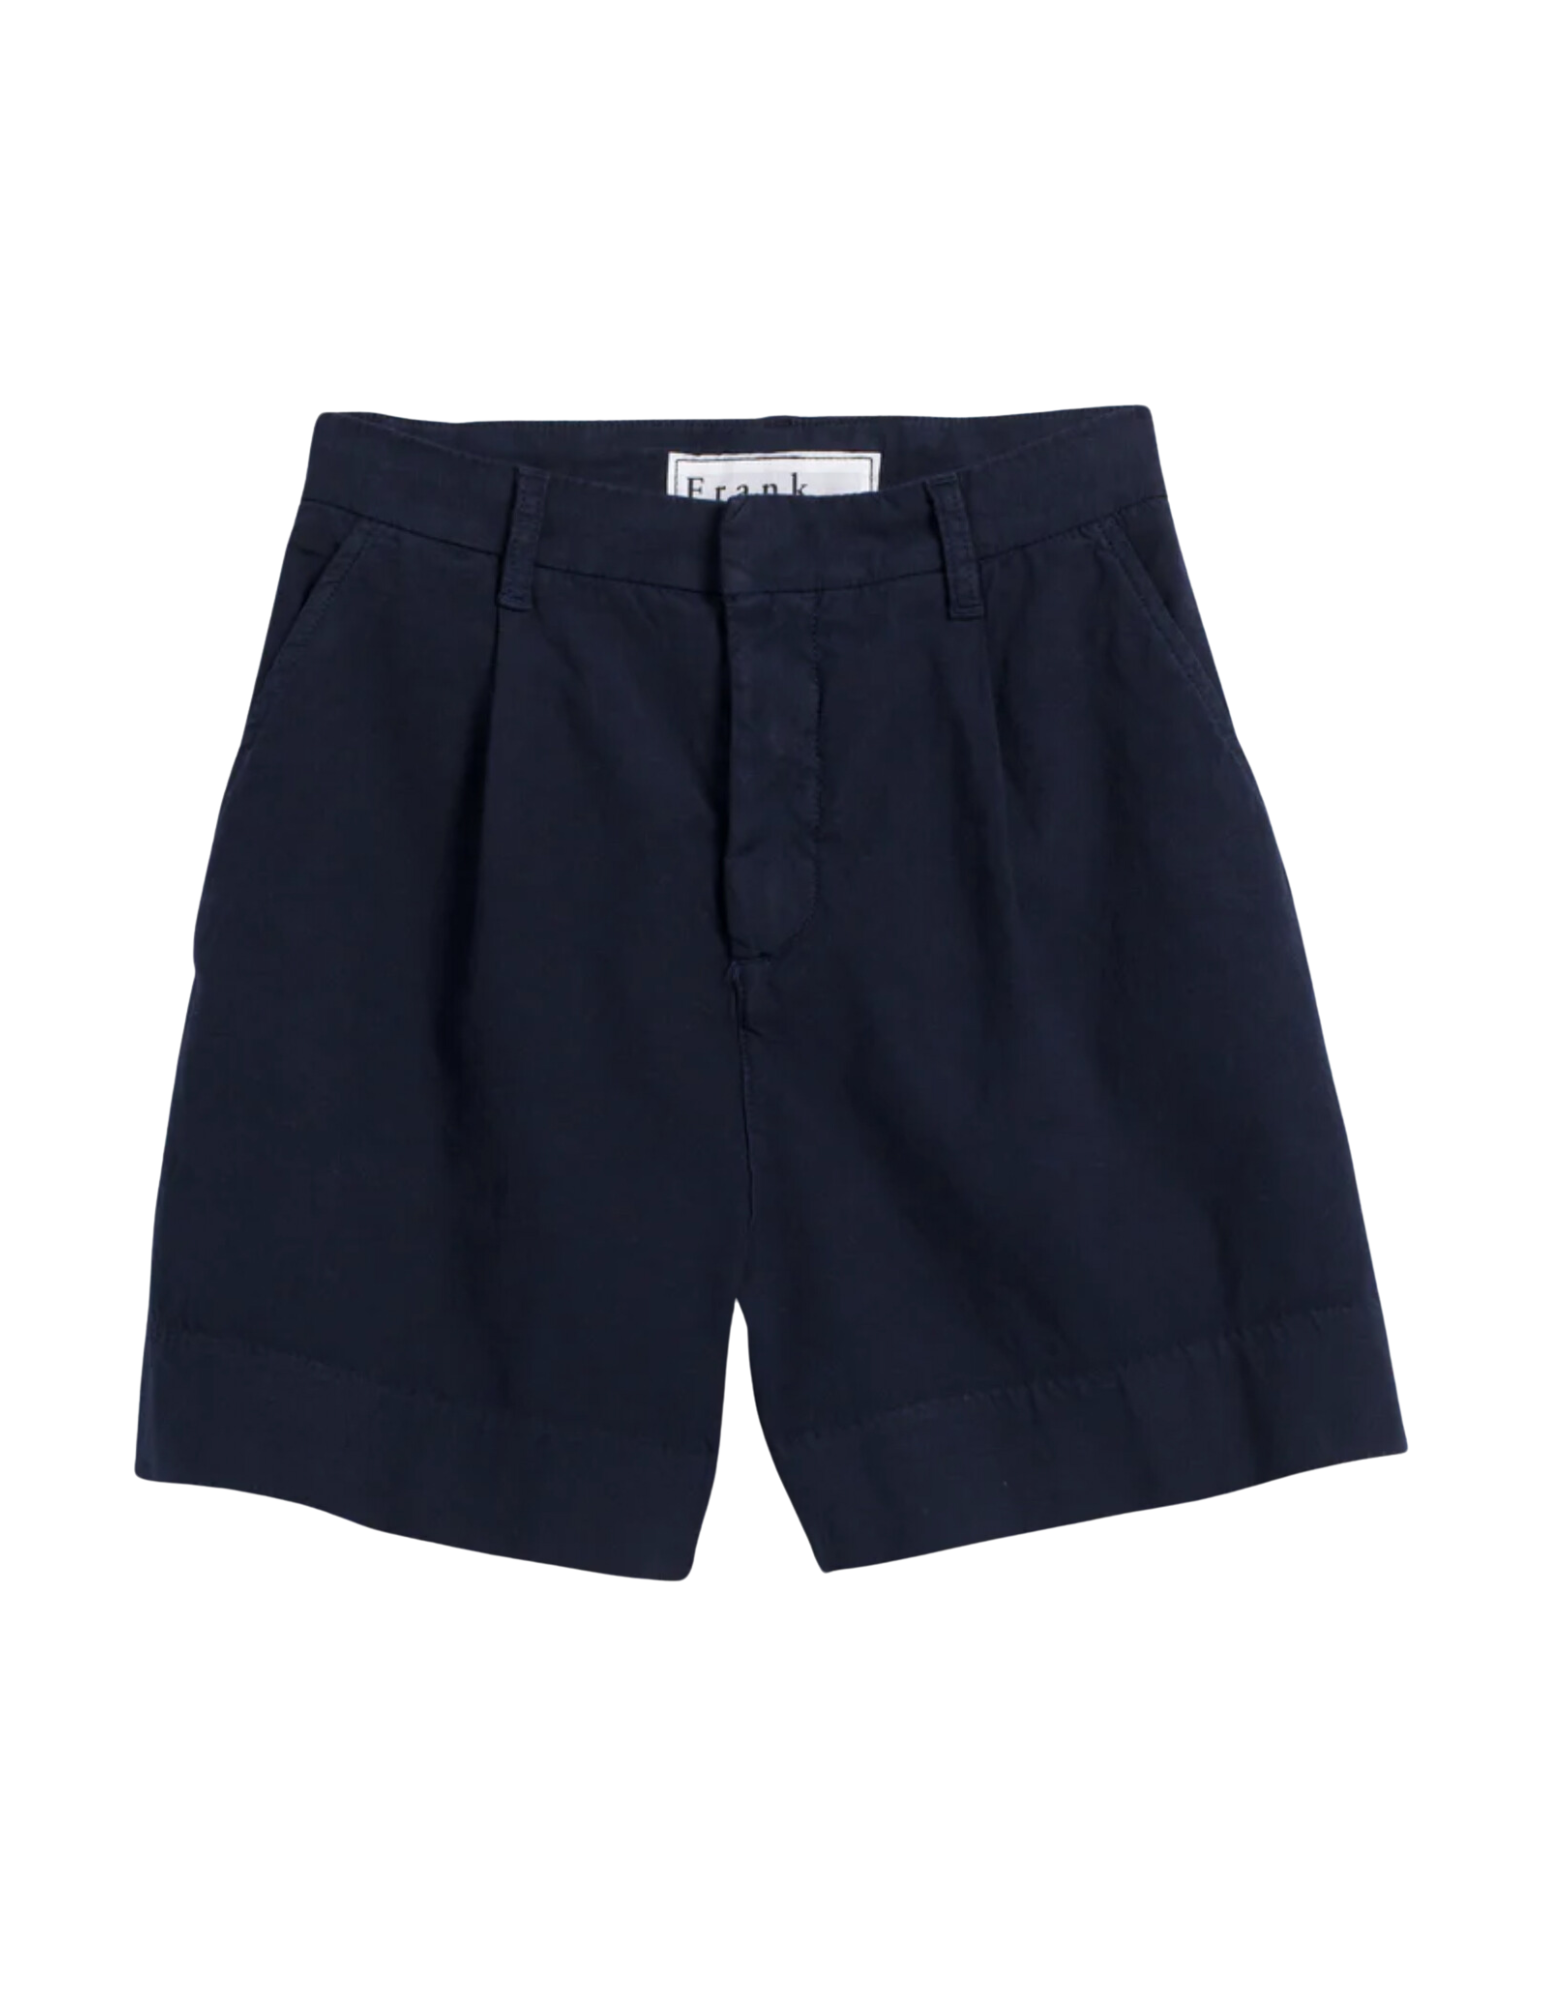 Waterford Short - Navy